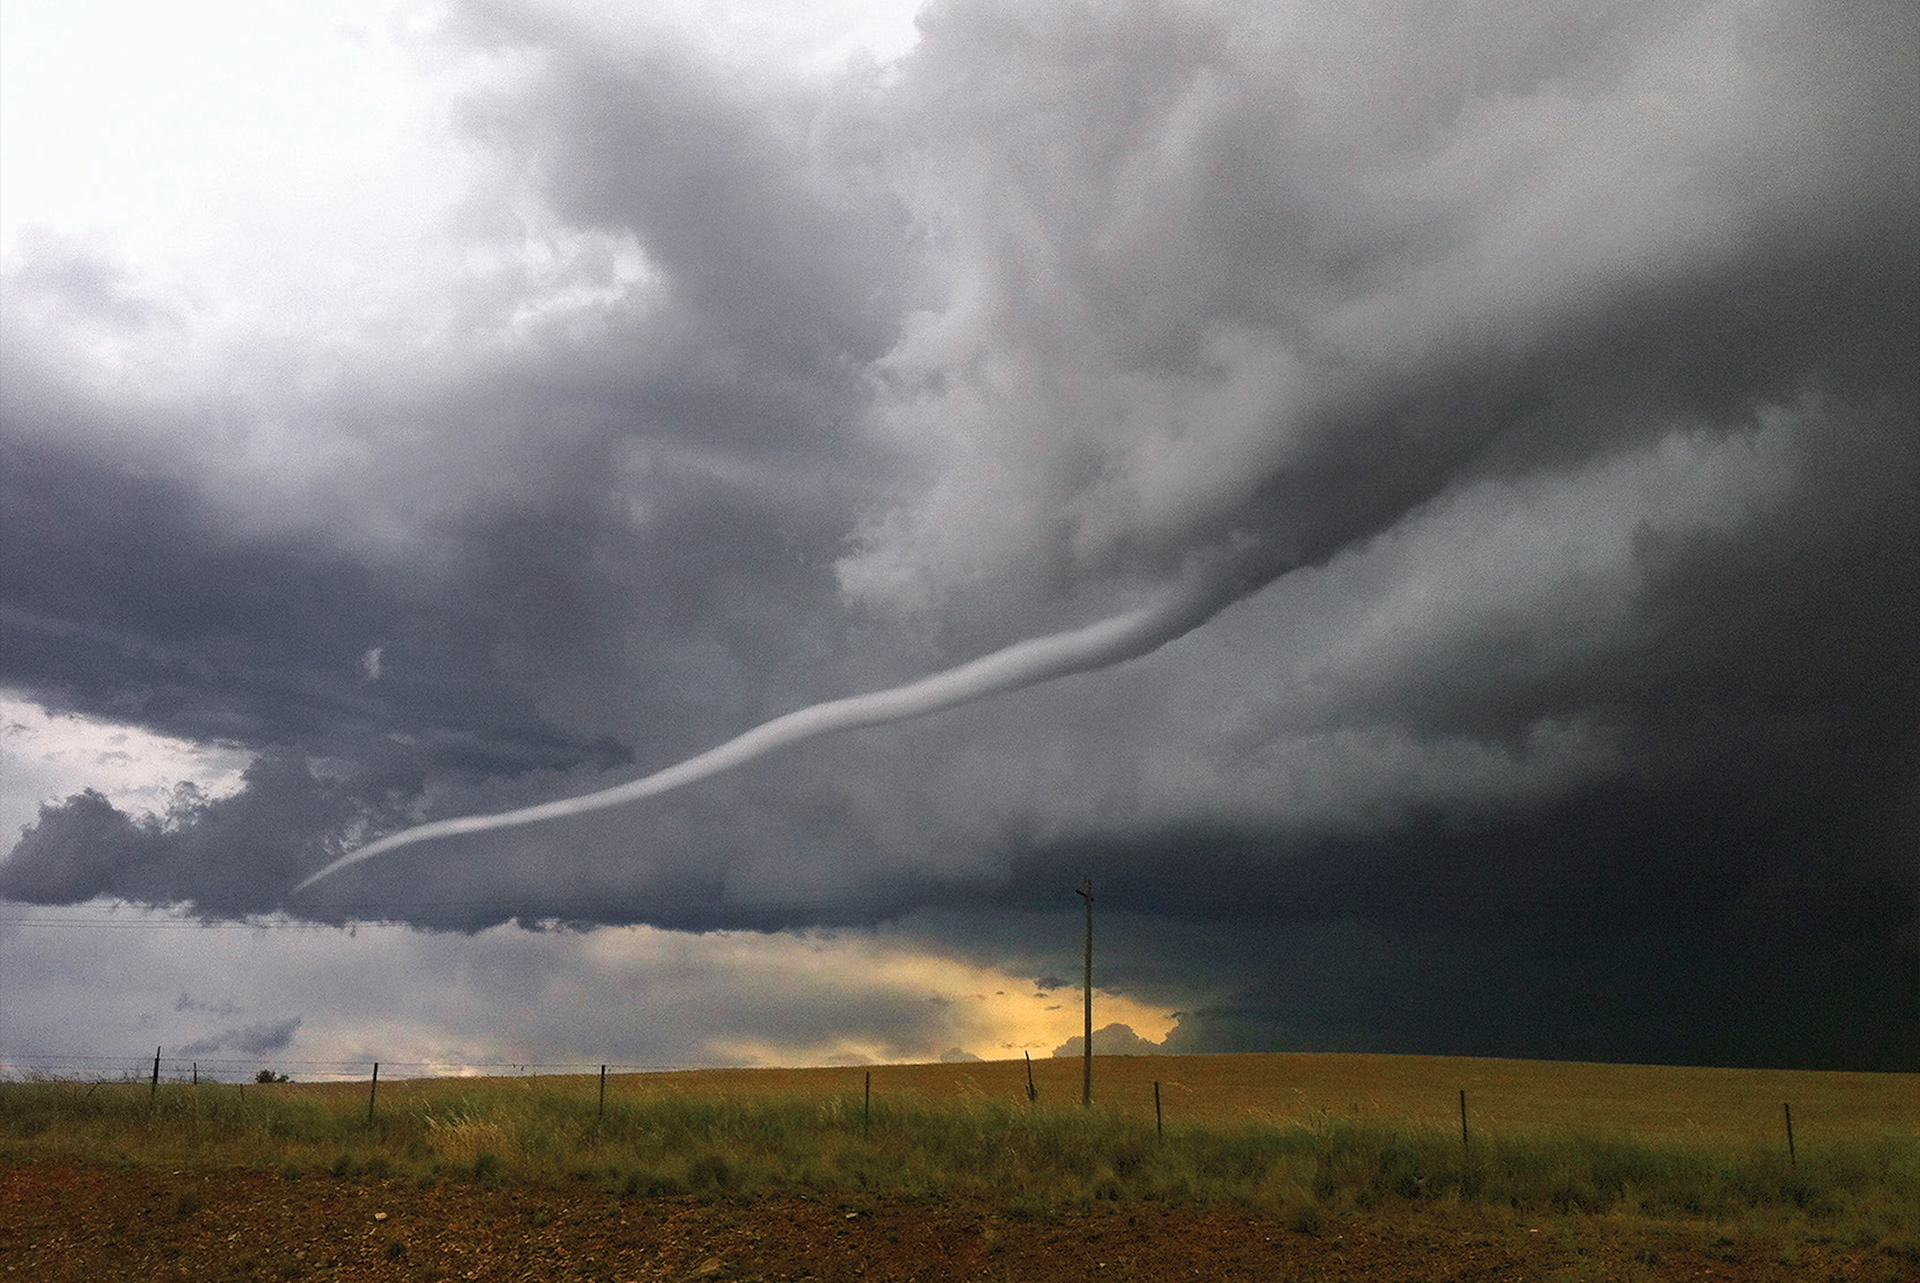 Funnel cloud reaching down from dark, clouded sky